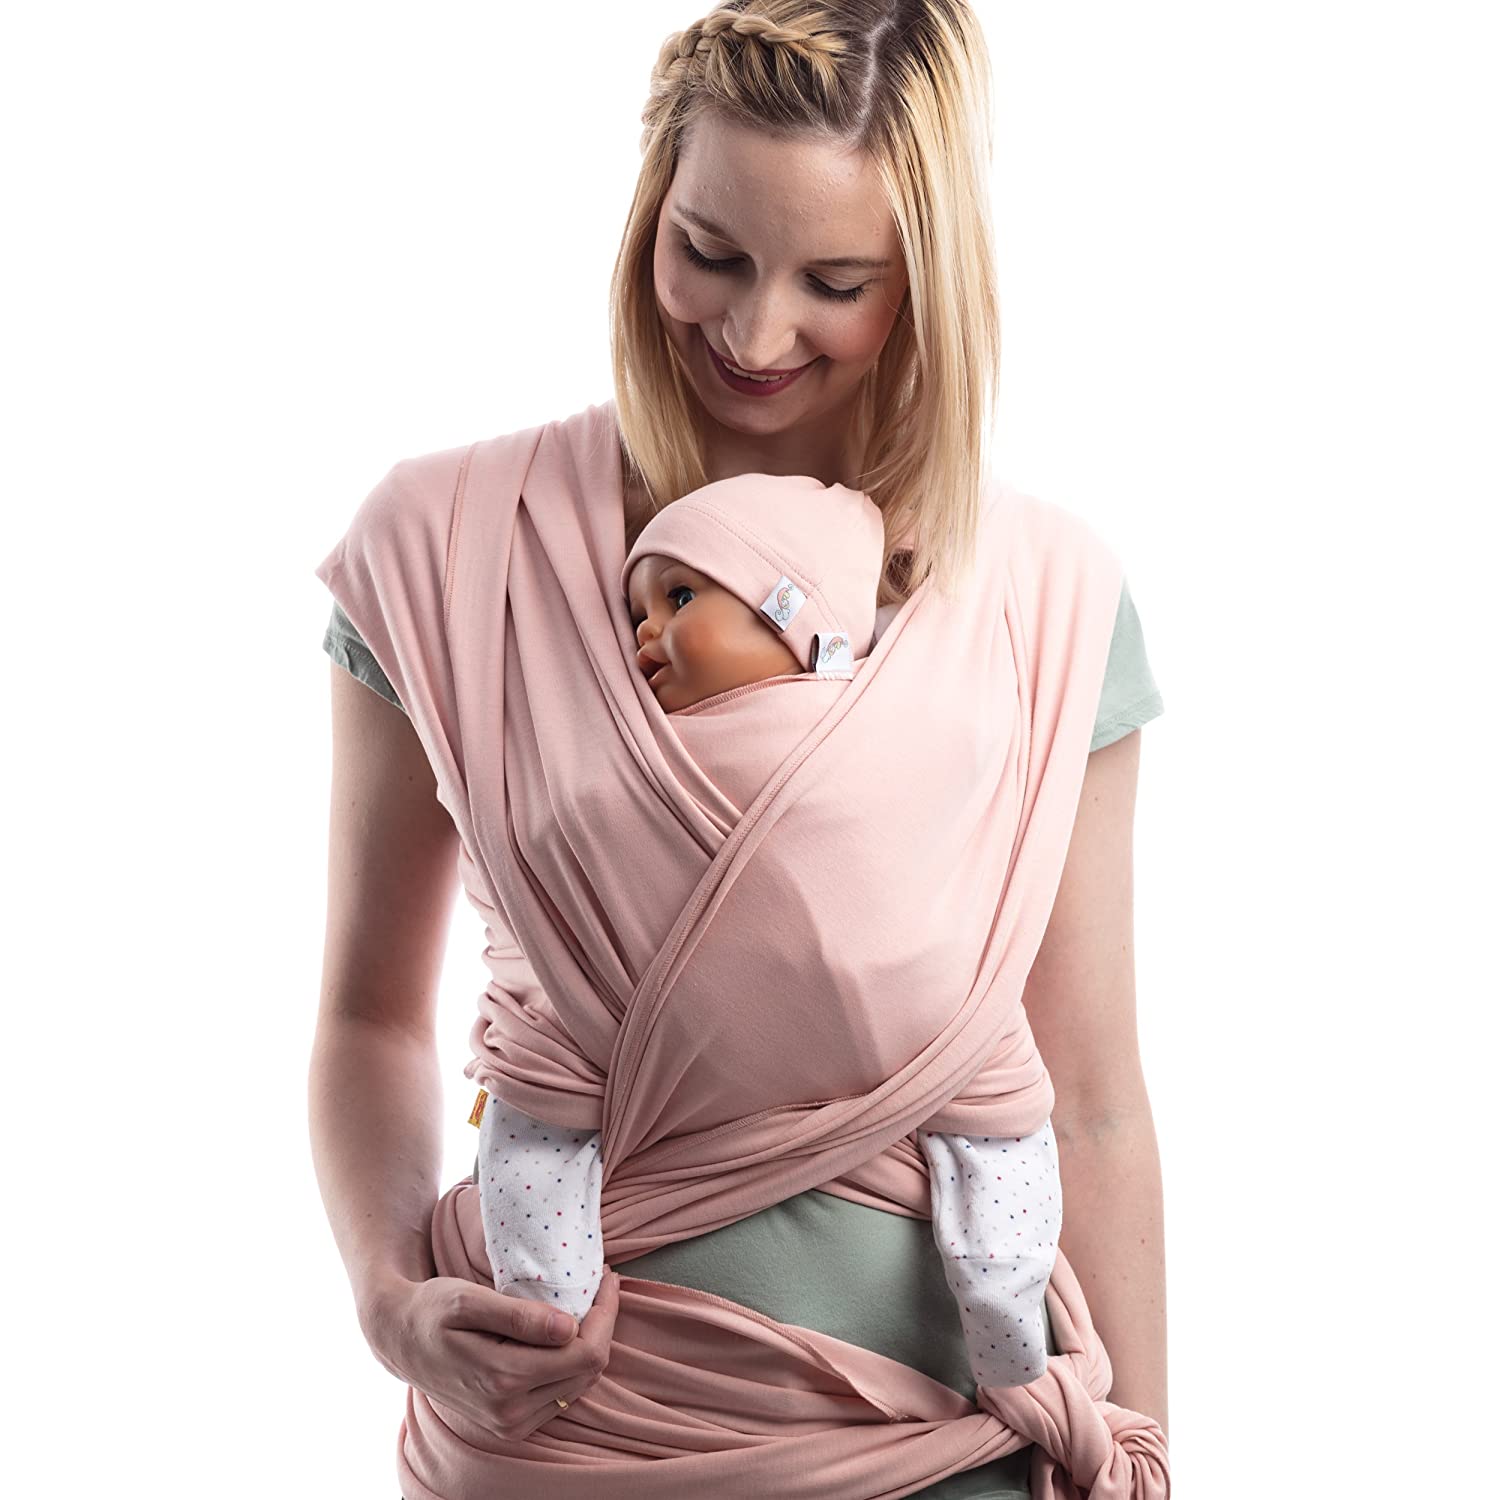 SCHMUSEWOLKE Flexi First Baby Sling Newborn Baby Sling Antique Rose Cotton 56 x 500 cm Baby Size 0-6 Months 2.8-8 kg Belly Carrier